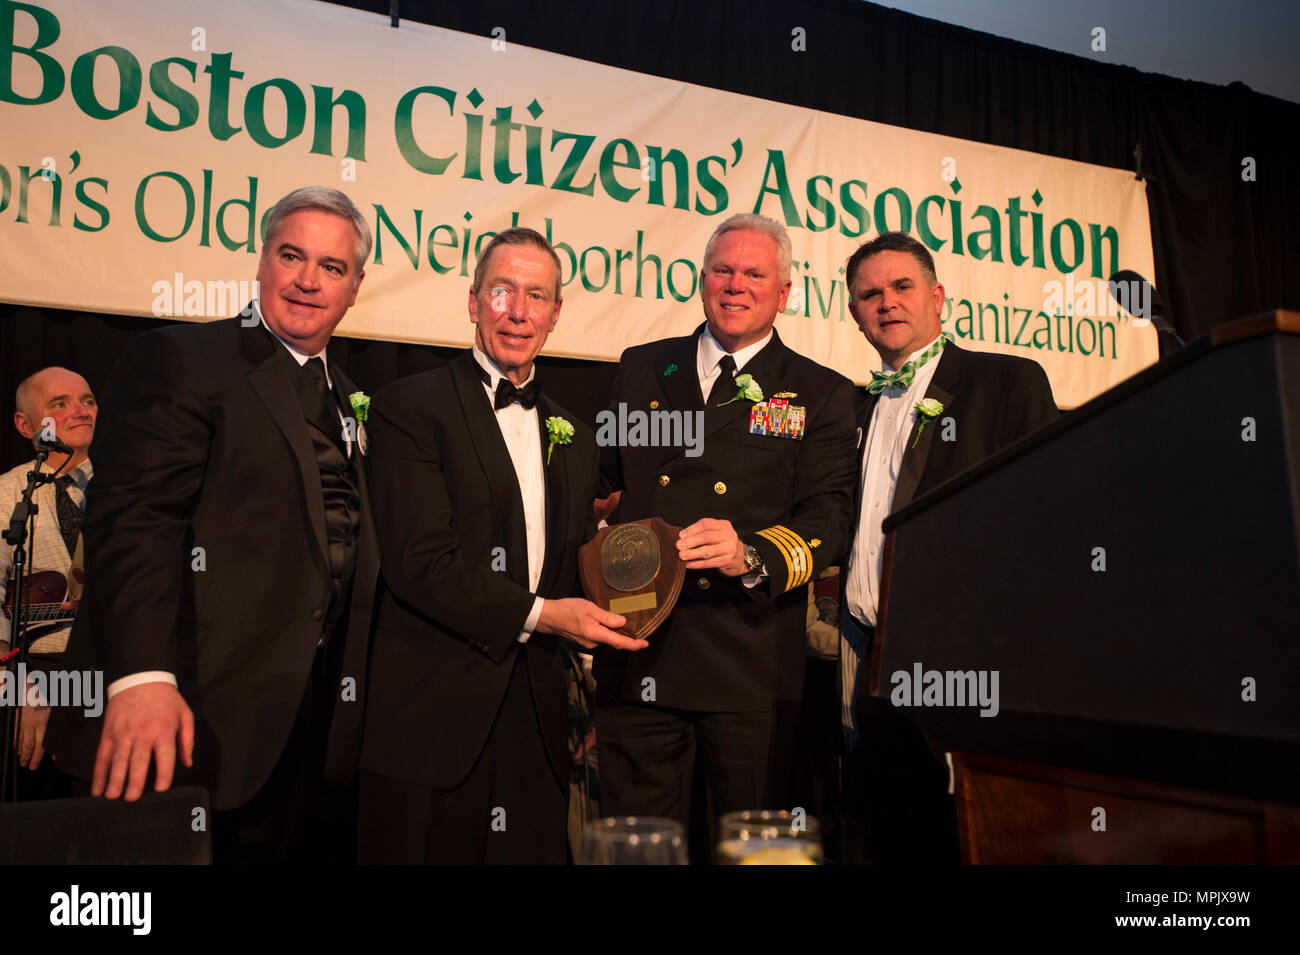 170317-N-WS581- 258    BOSTON (March 17, 2017) USNS Comfort (T-AH 20) Commanding Officer, Capt. Lanny Boswell, presents a gift to the South Boston Citizen’s Association at their Evacuation Day Banquet. Comfort participated in festivities and community programs throughout the city as part of Boston's St. Patrick’s Day celebration. (U.S. Navy photo by Mass Communication Specialist Andrew J. Sneeringer) Stock Photo